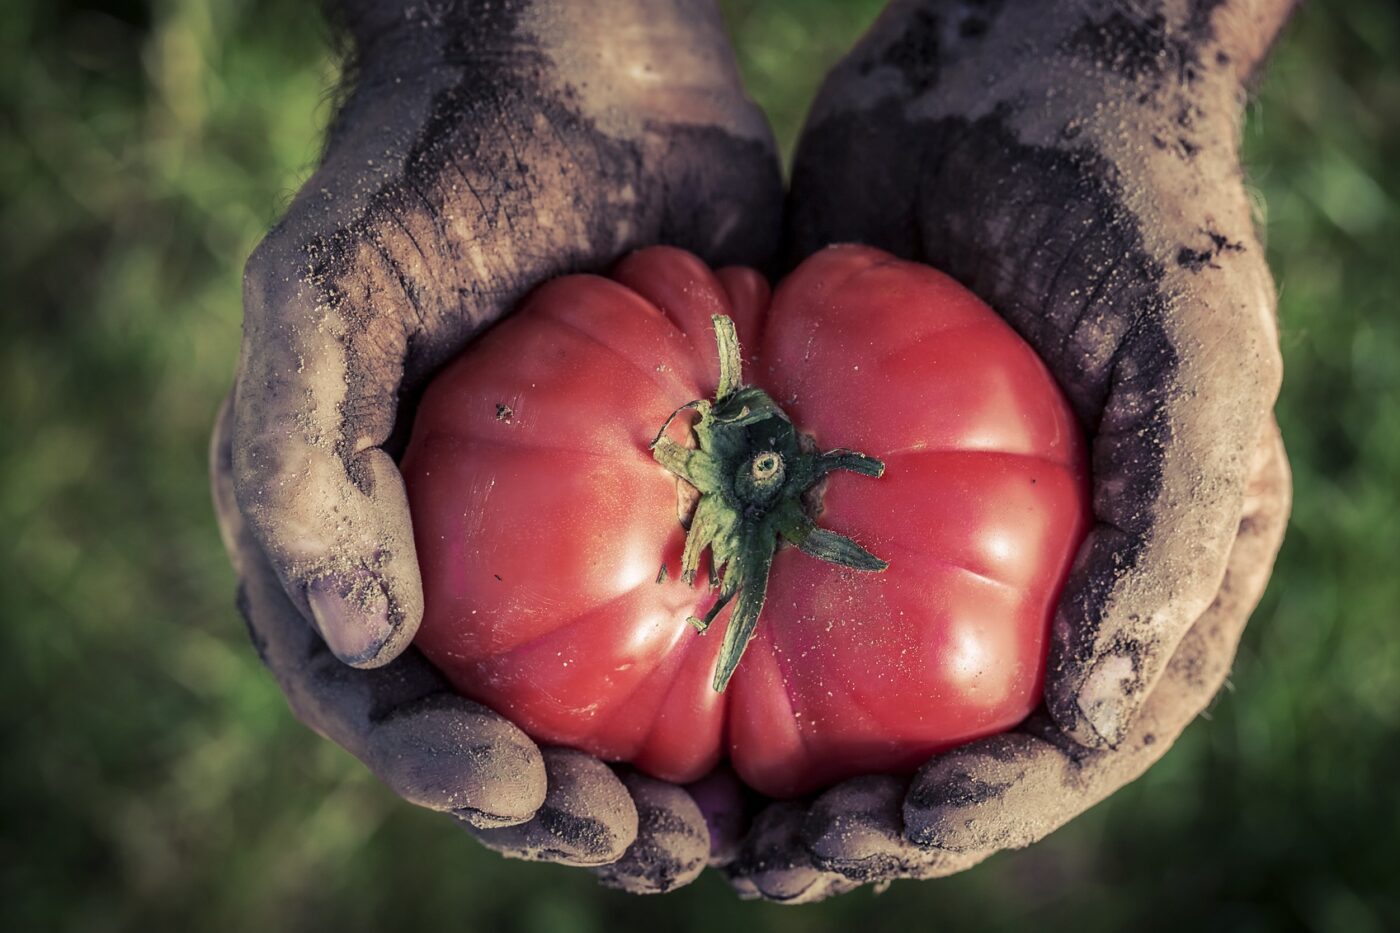 A freshly harvested tomato is held in hands